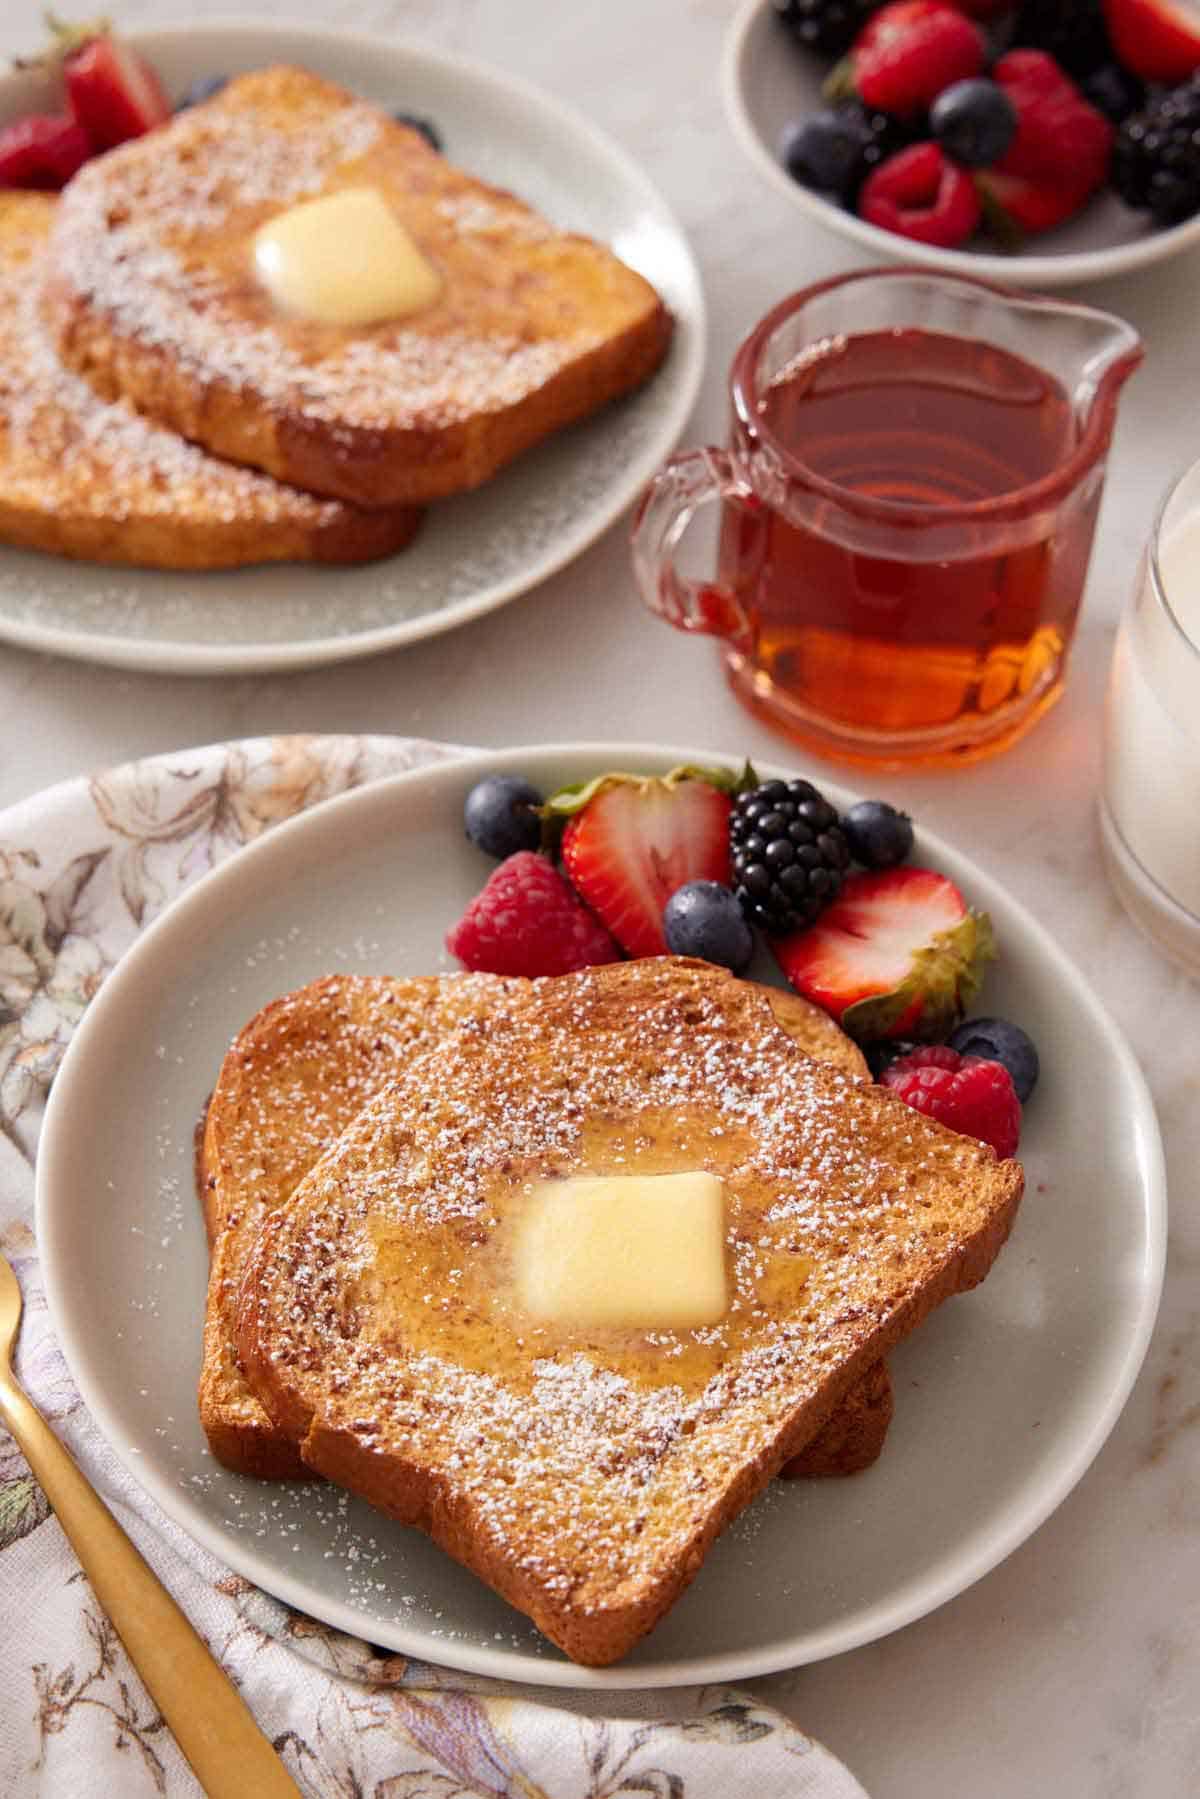 A plate of air fryer french toast with powdered sugar, butter and syrup on top with berries on the side. A small vessel of syrup and another plated serving in the background.